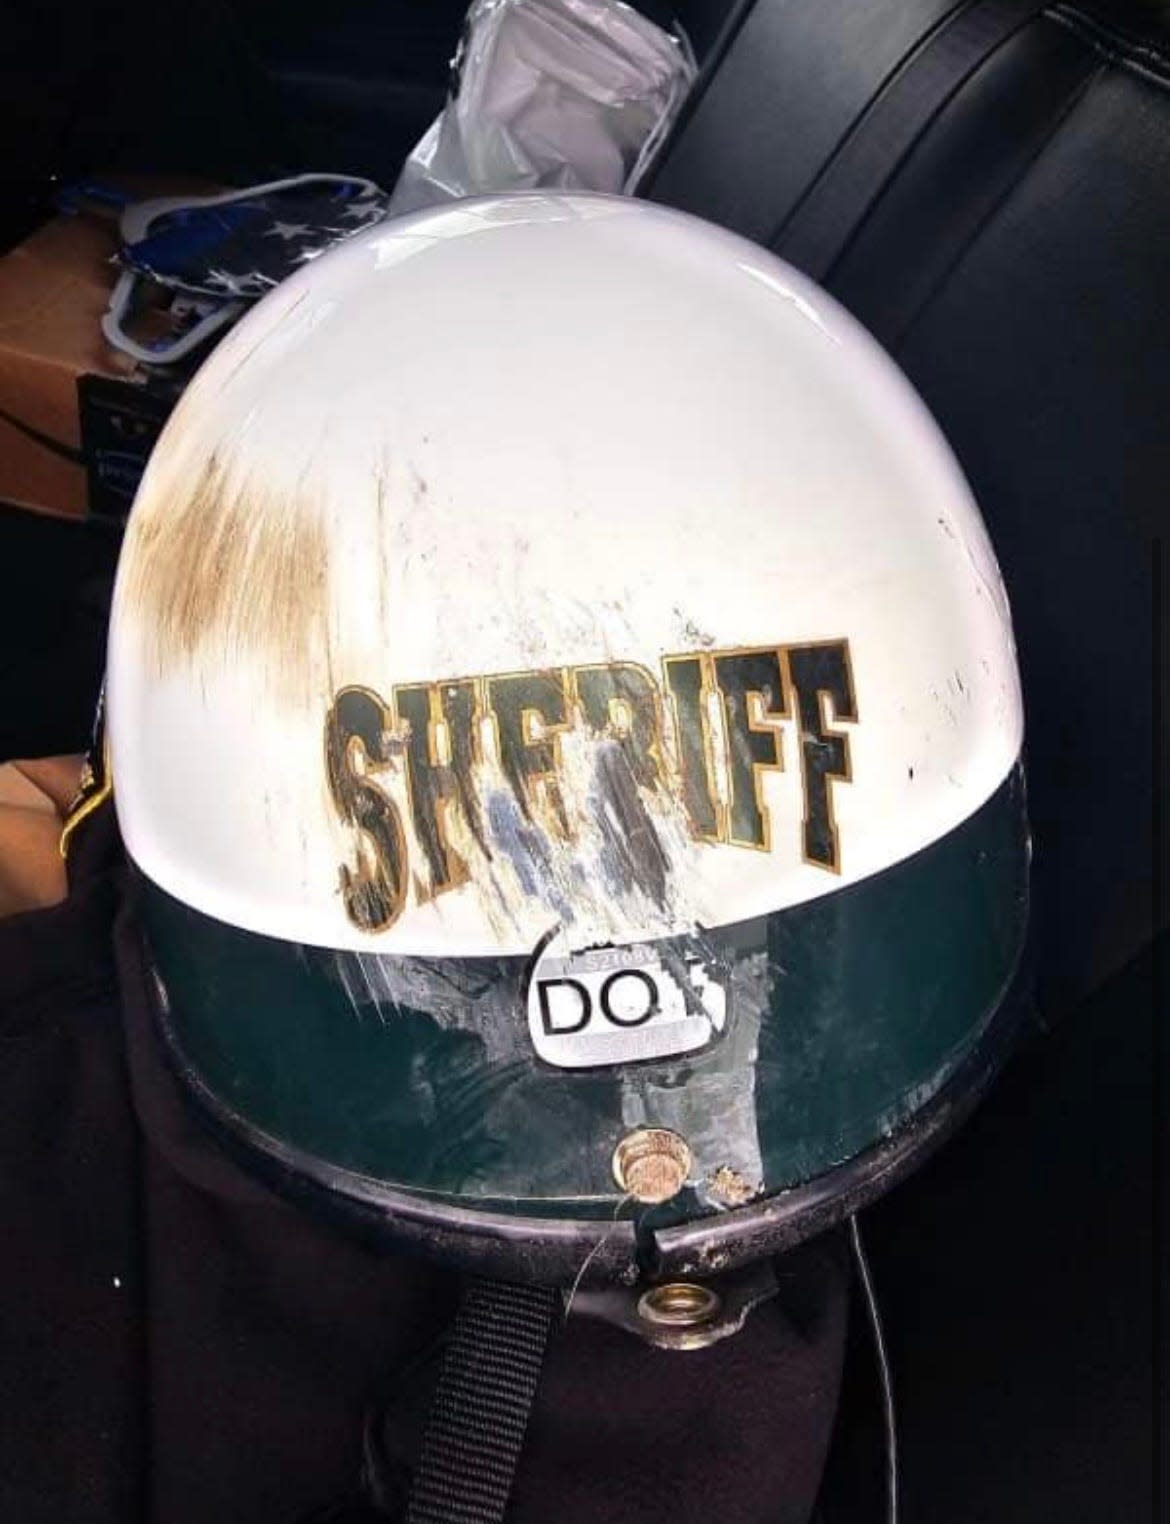 Flagler County Sheriff's Office Deputy First Class Benjamin Stamps' helmet sustained damage but protected his head when a car crossed into his lane and collided with his patrol motorcycle as he rode to work on Tuesday, the sheriff's office stated.